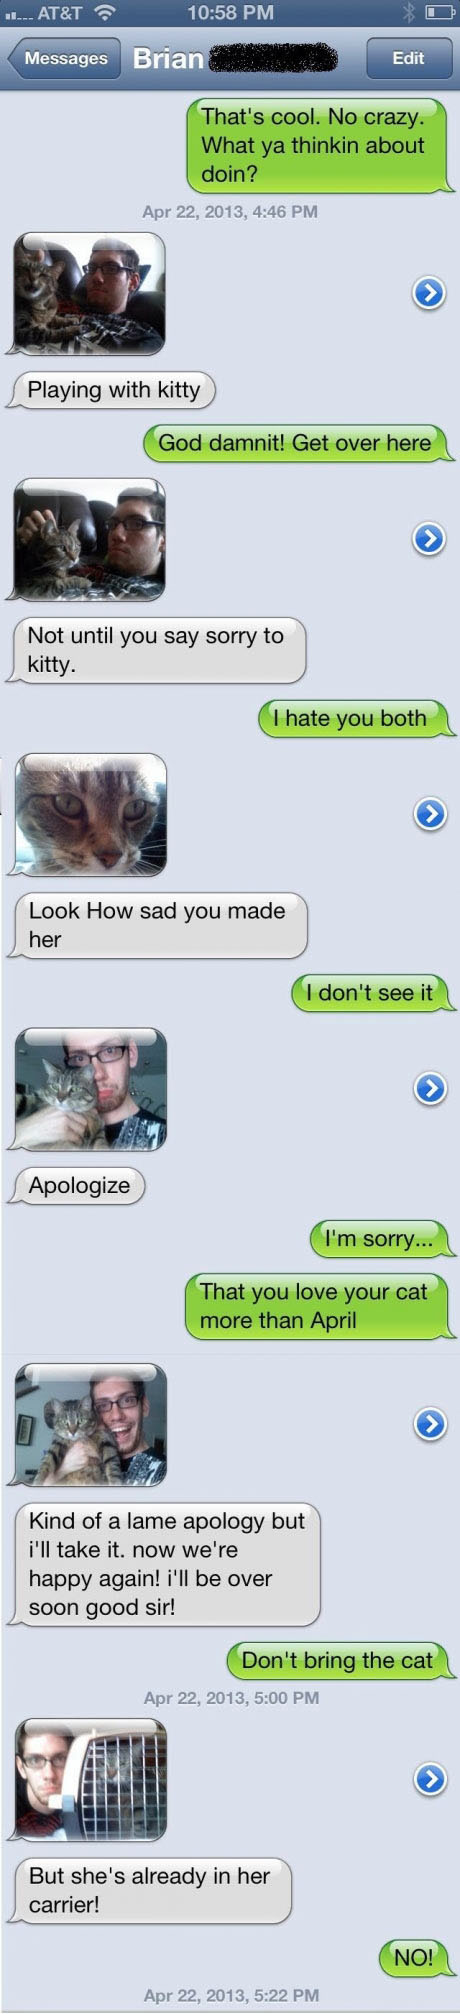 Say sorry to kitty…